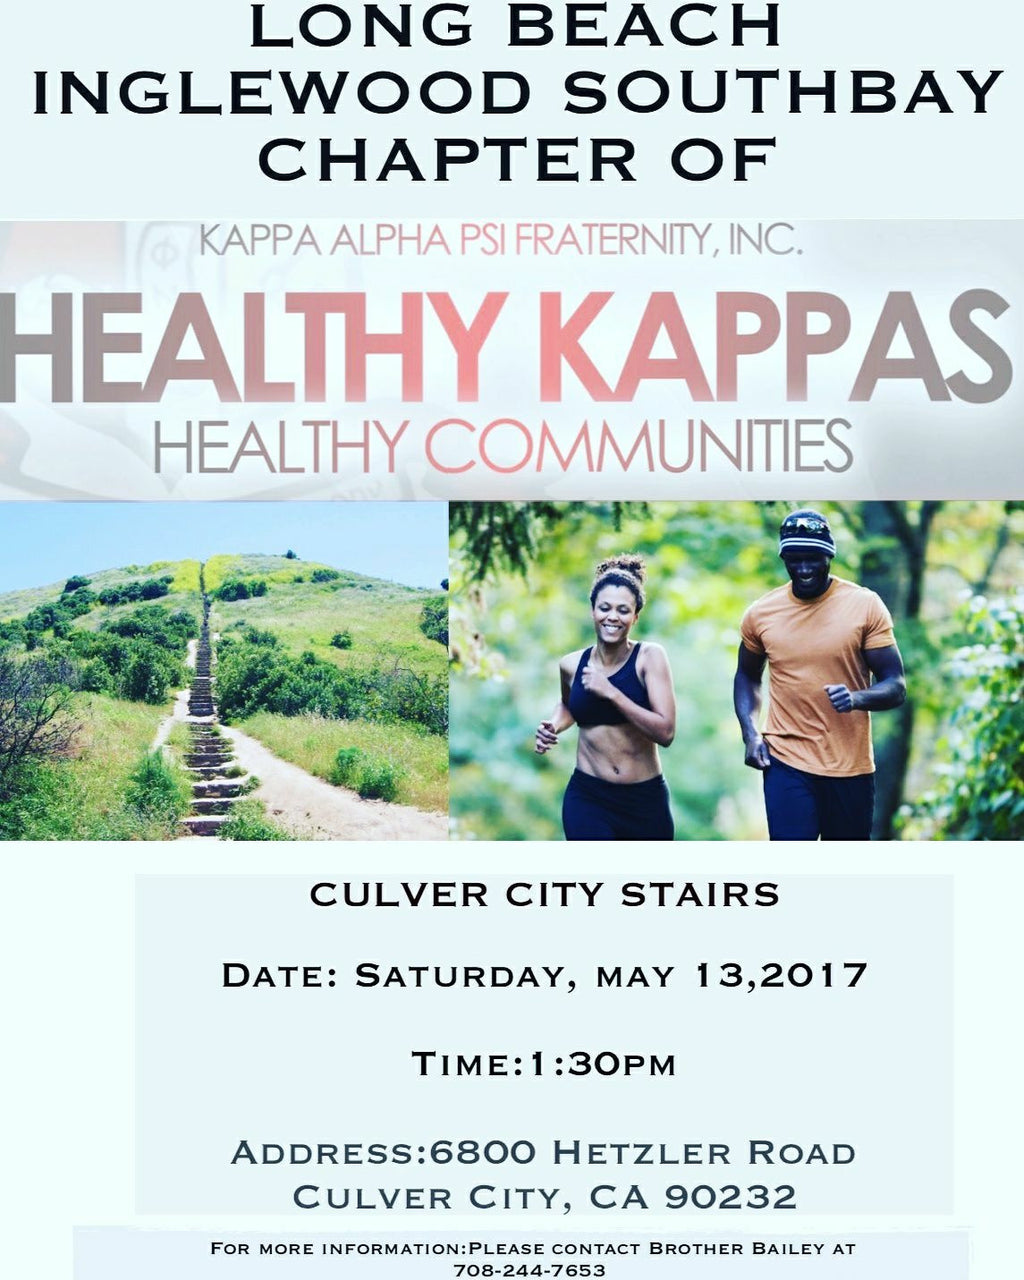 Healthy Kappas, Healthy Communities workout